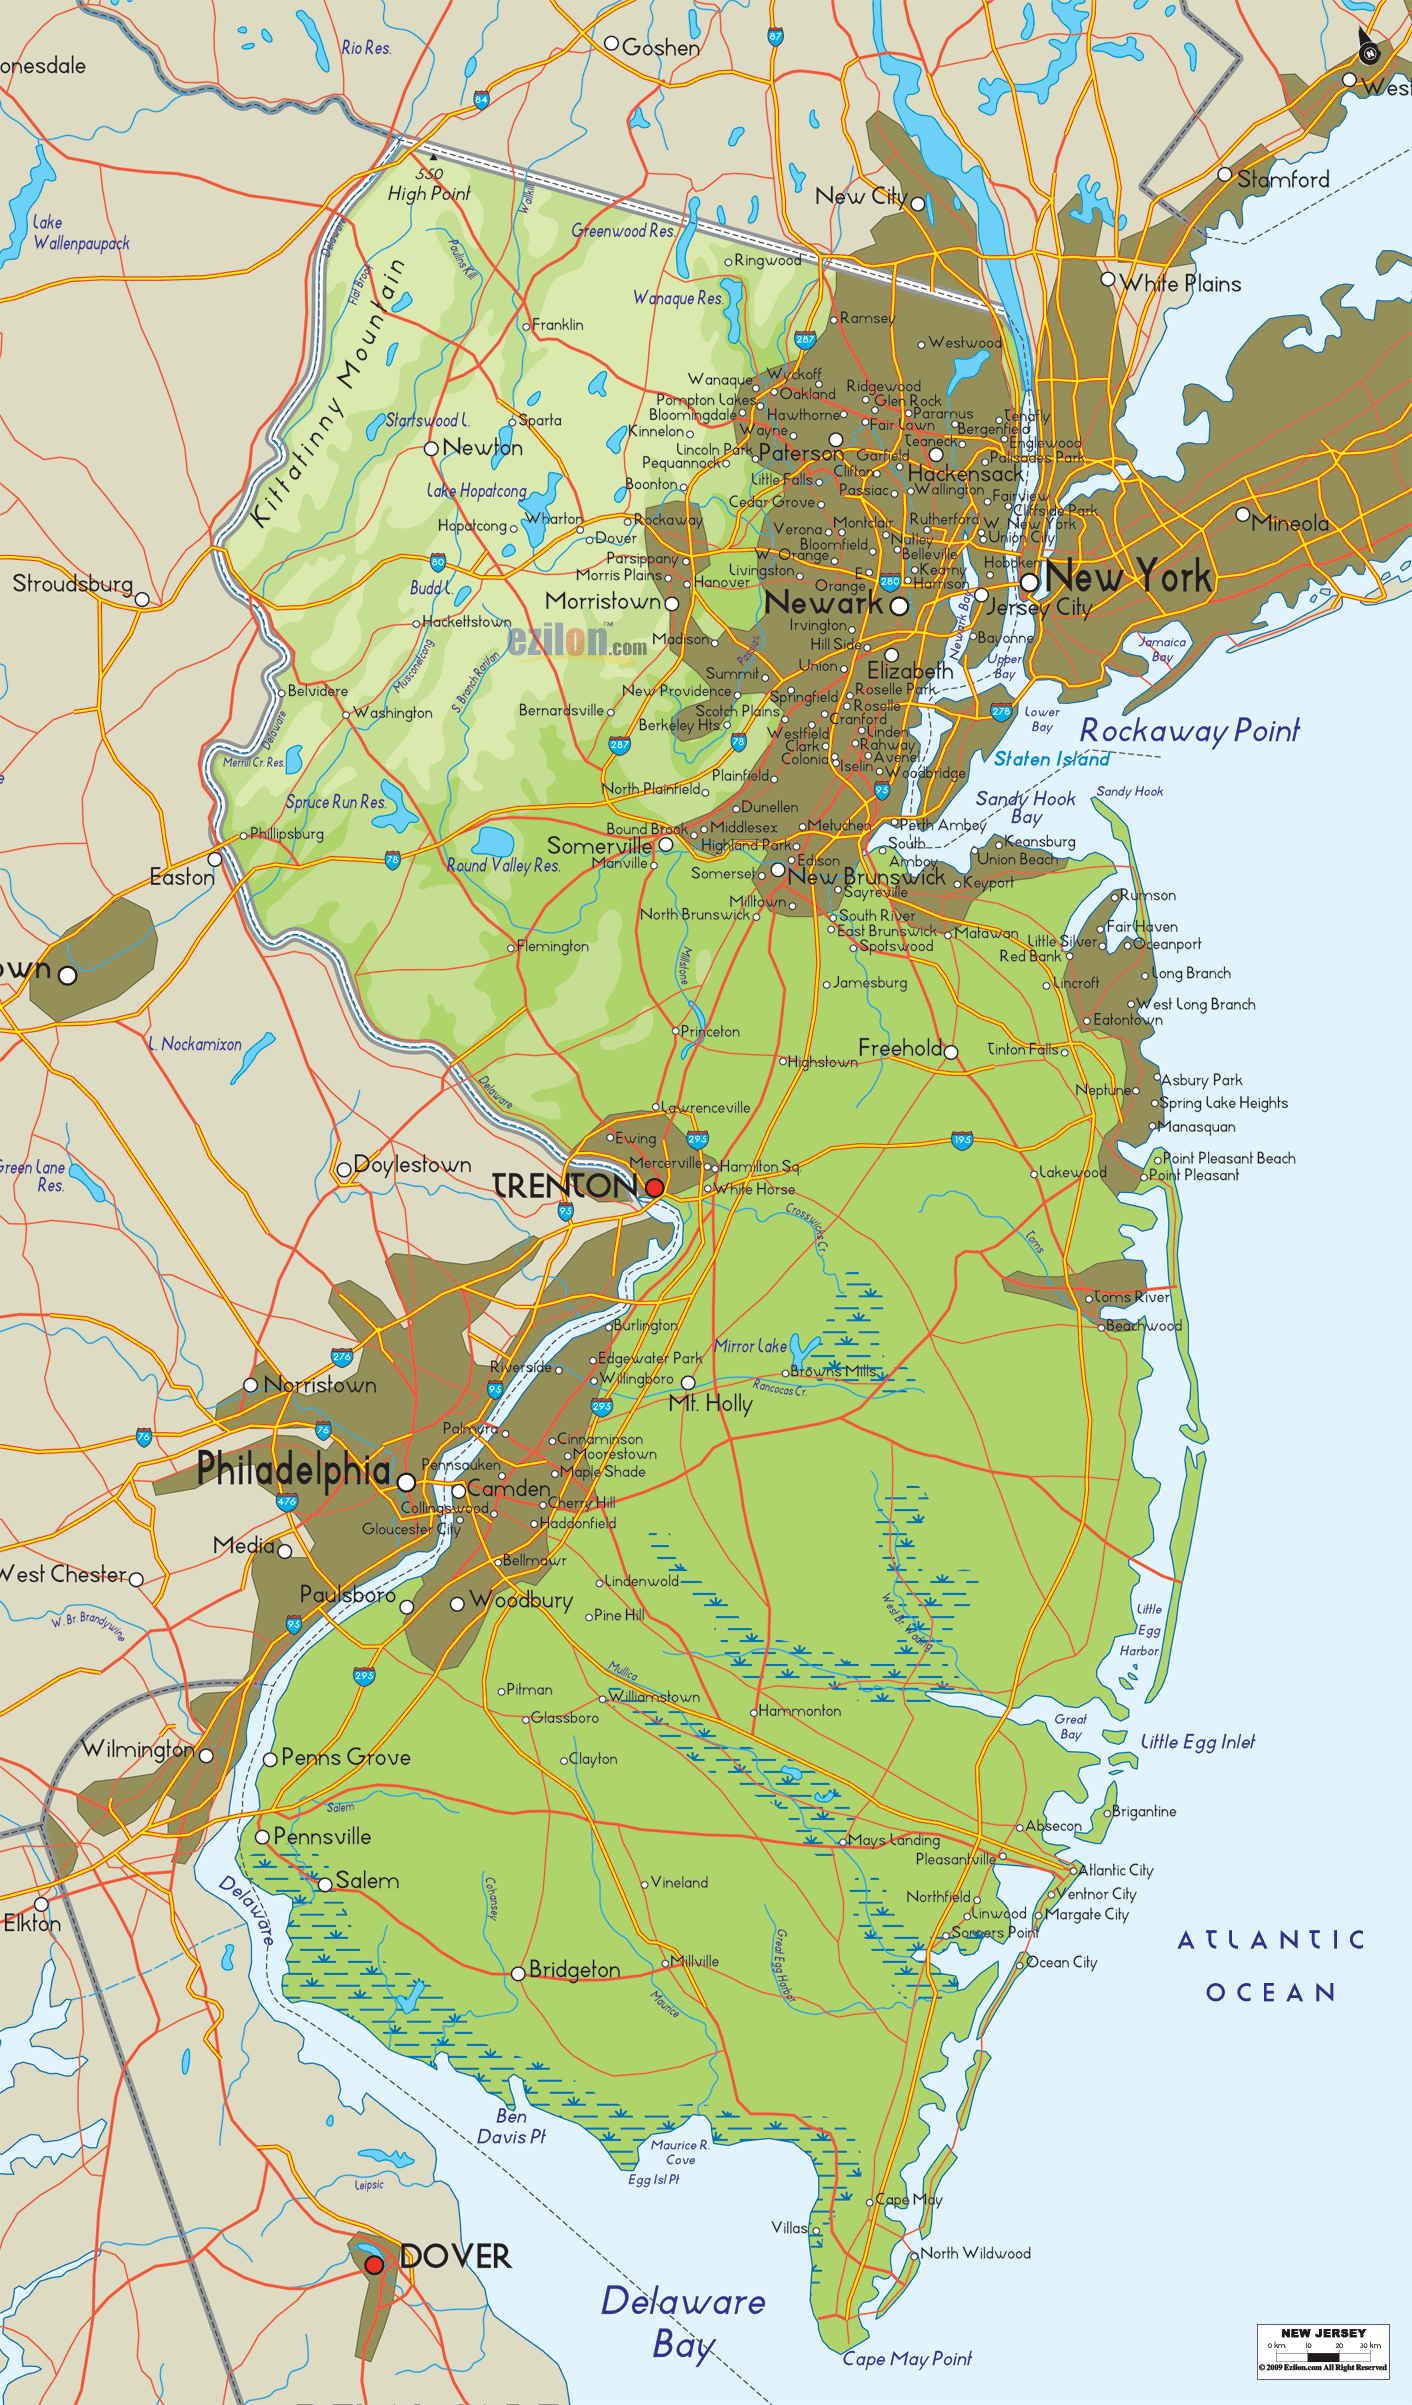 Physical map of New Jersey State, USA showing major geographical features such as rivers, lakes, topography and land formations.